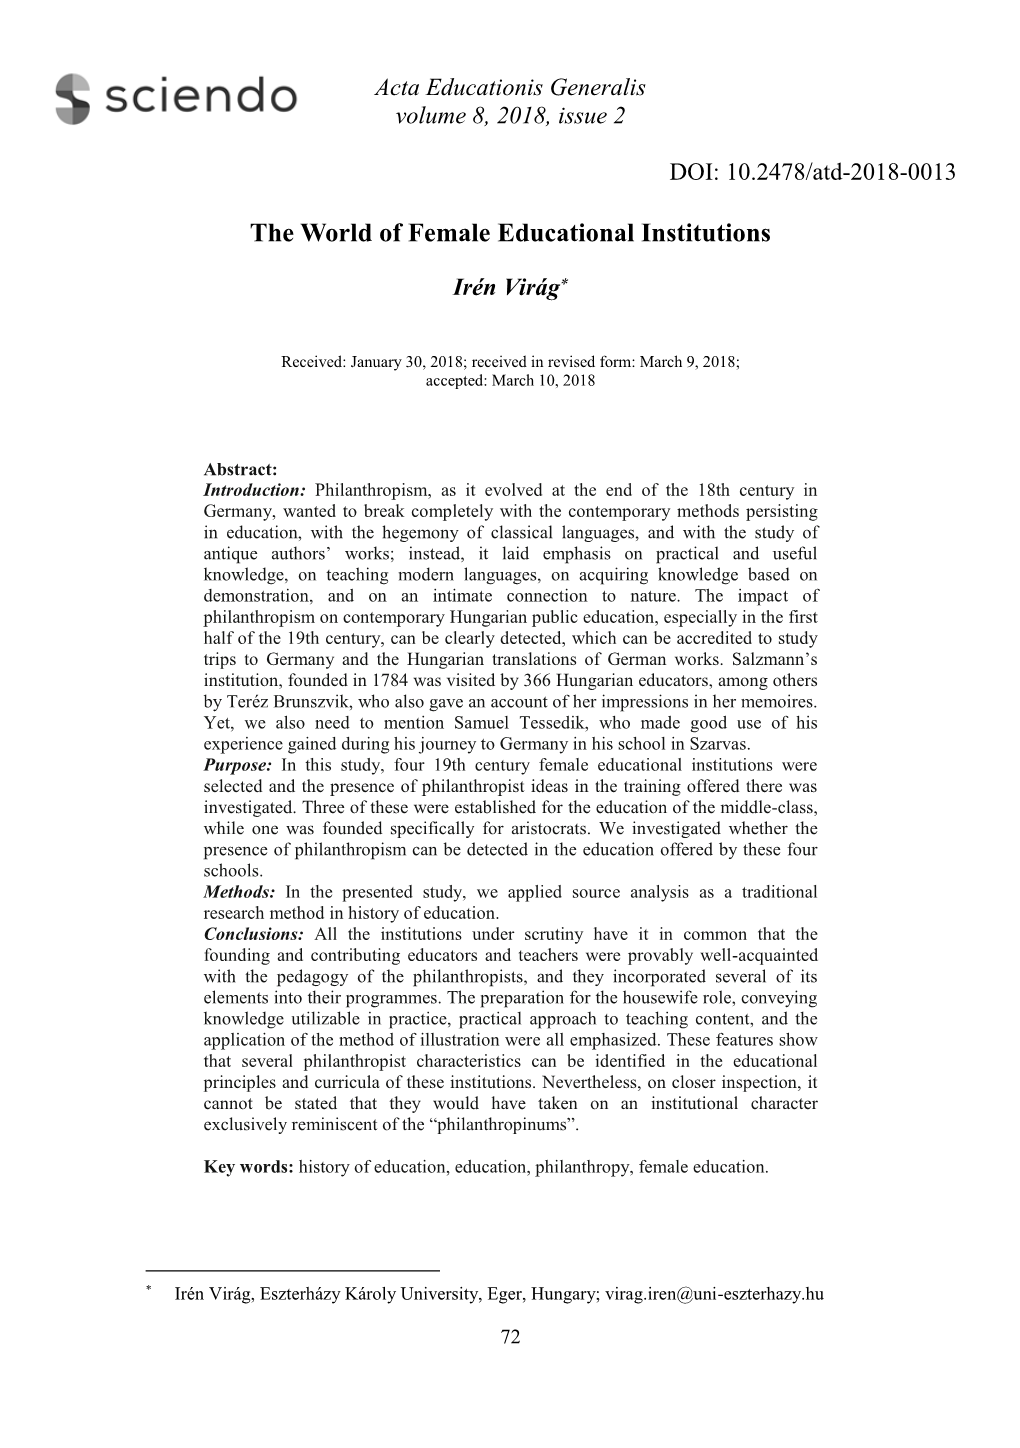 The World of Female Educational Institutions